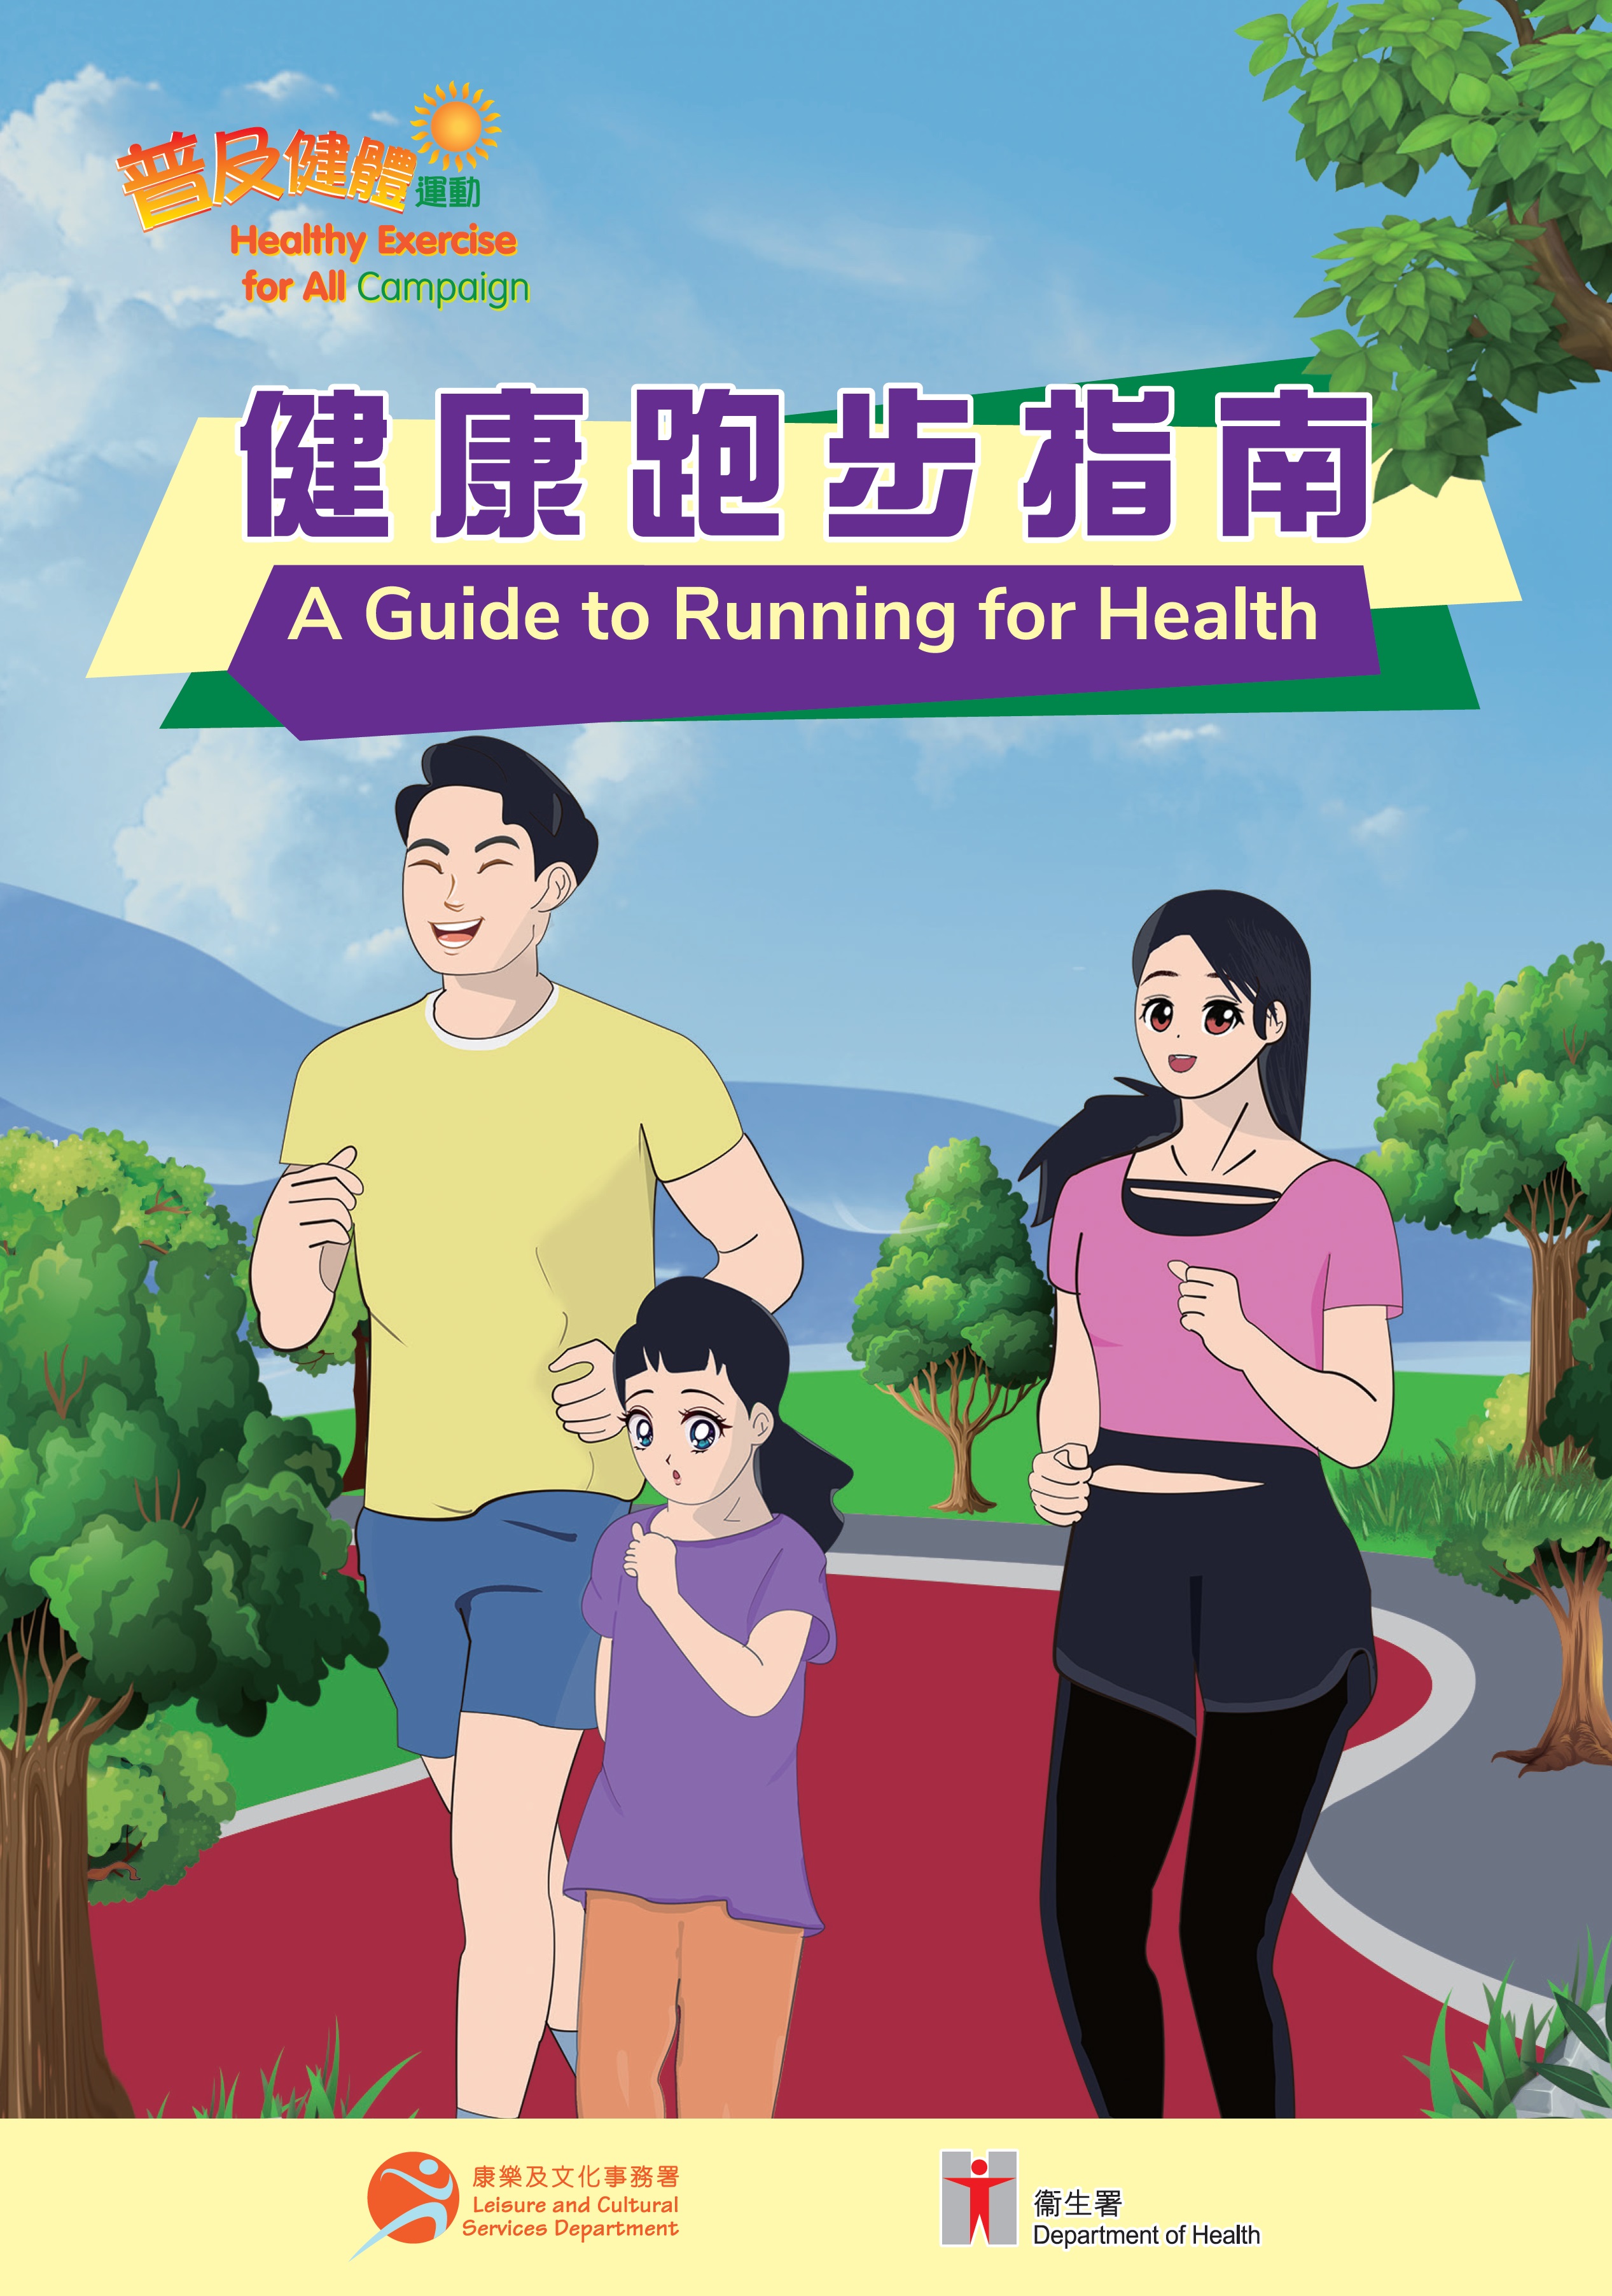 A Guide to Running for Health